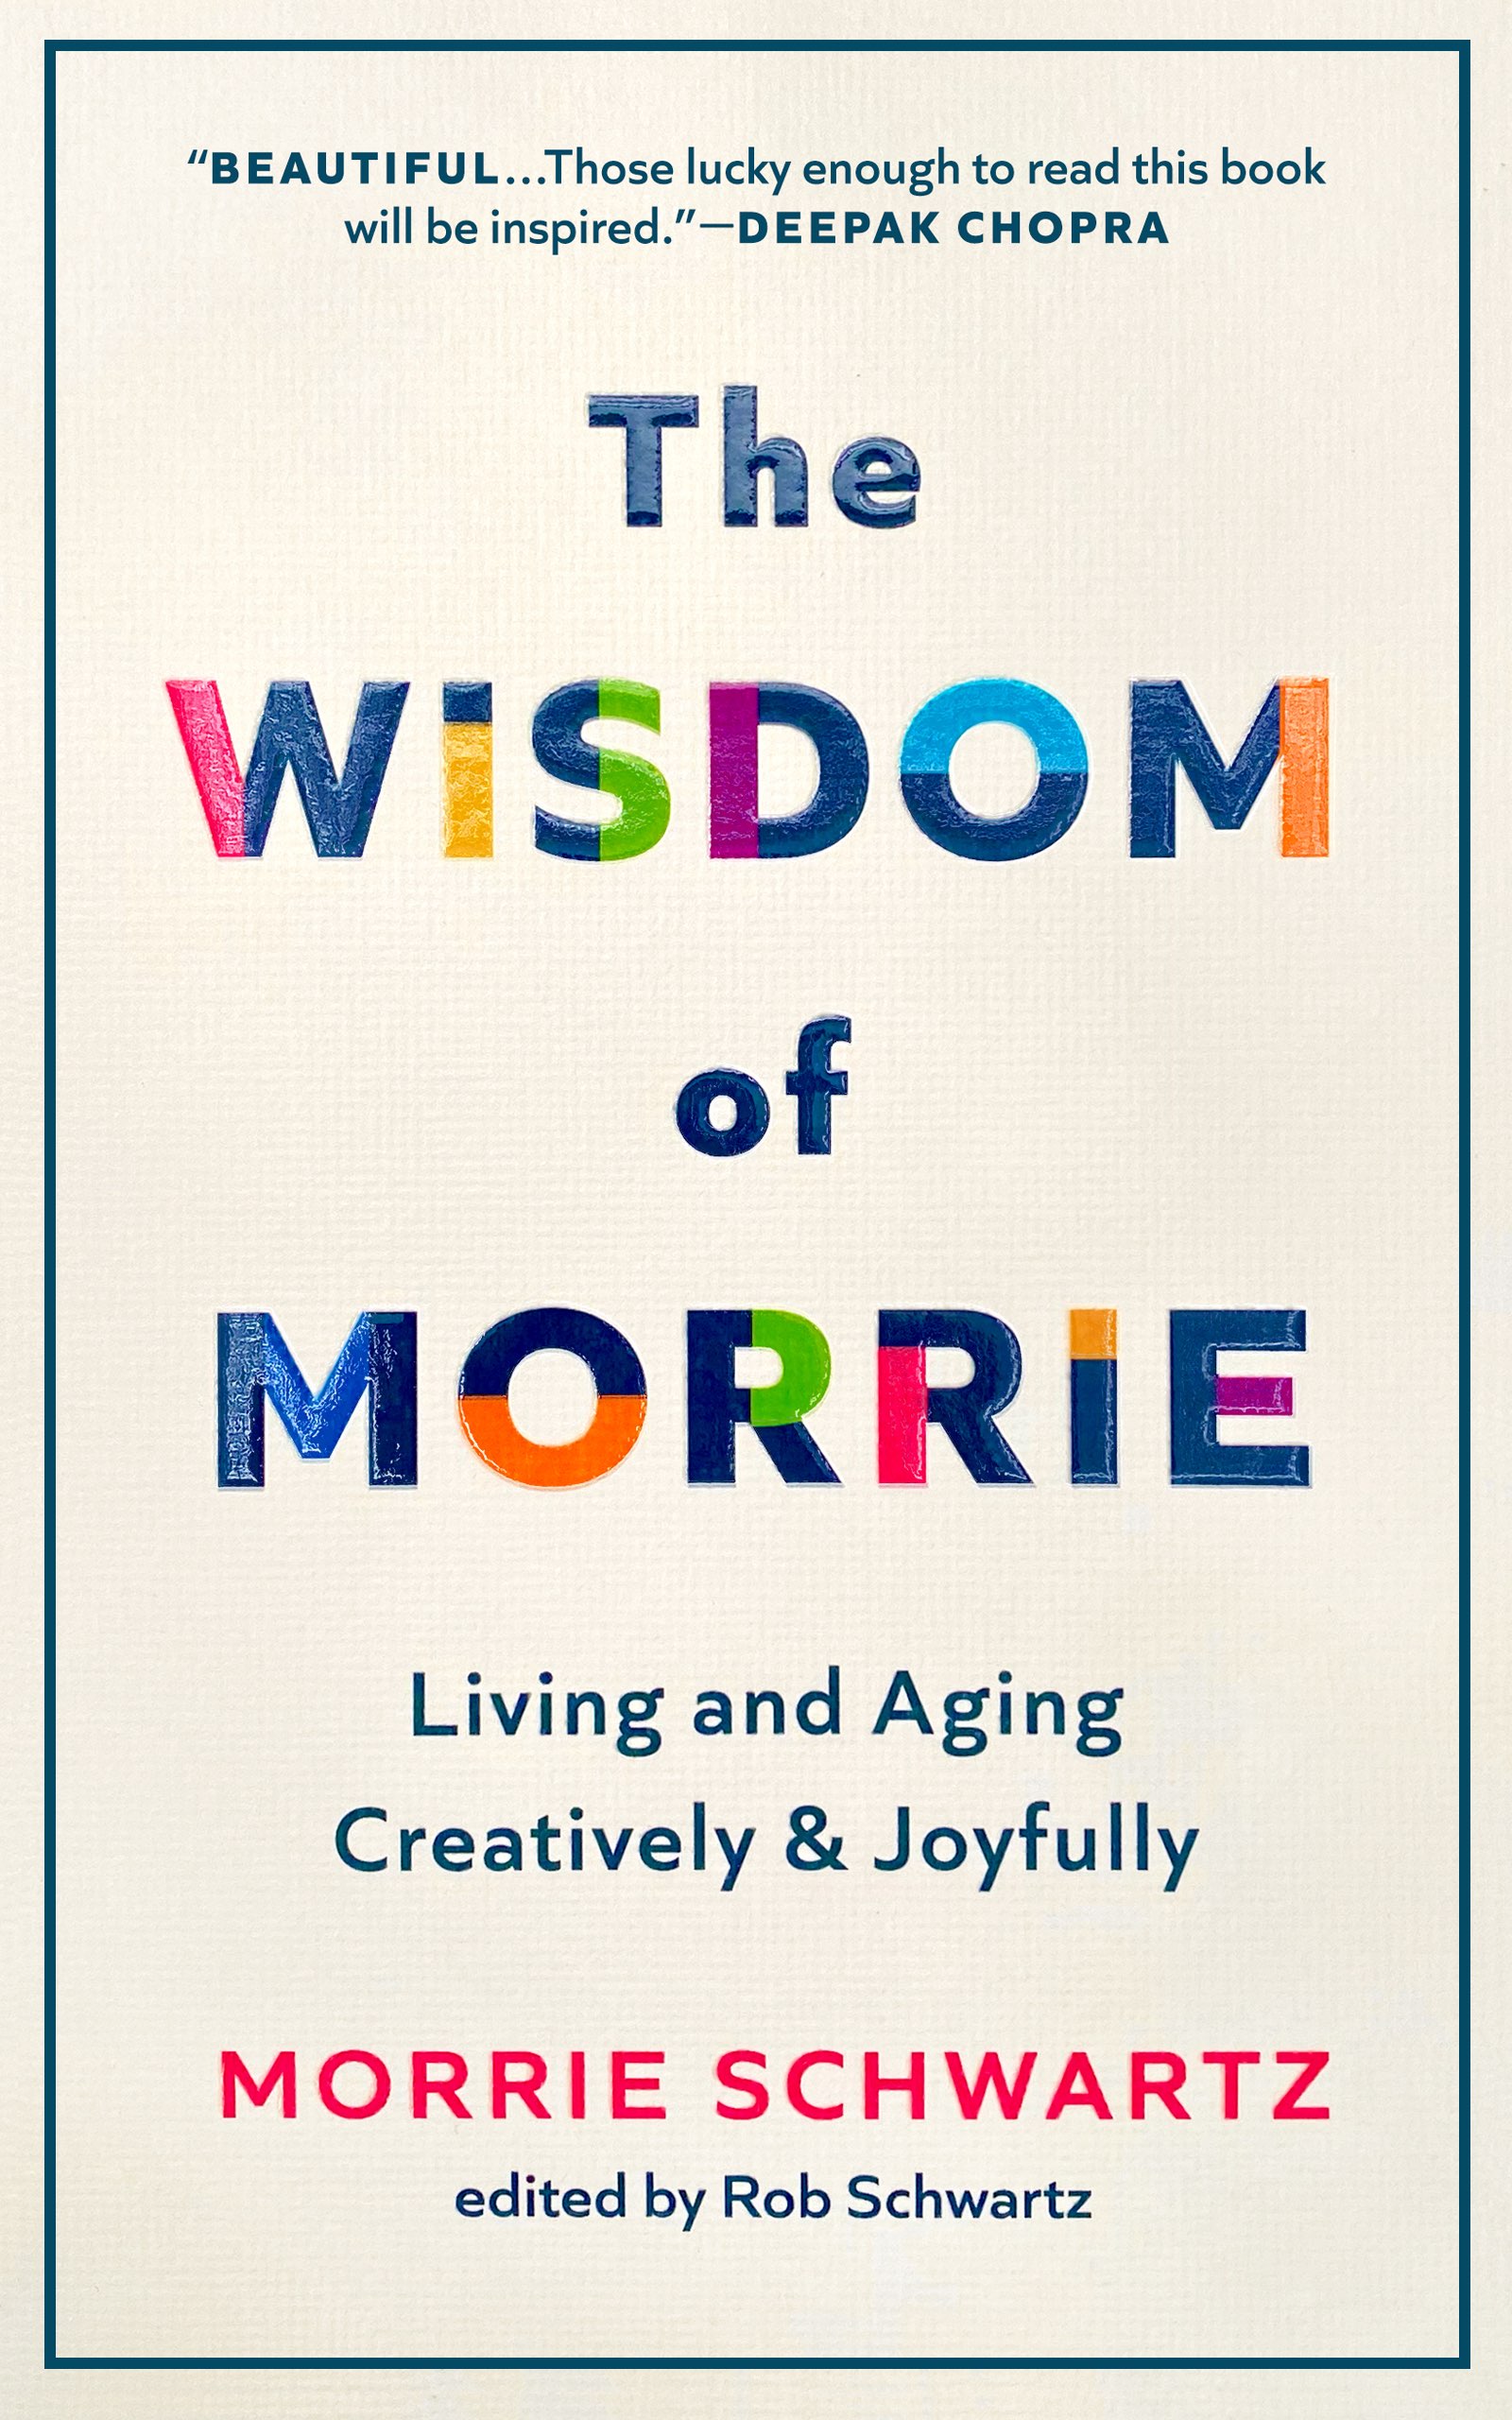 Morrie Schwartz, who is the inspiration behind the blockbuster book, “Tuesdays with Morrie”, posthumously releases a new book, “The Wisdom of Morrie” (Blackstone Publishing) with his son Rob Schwartz.